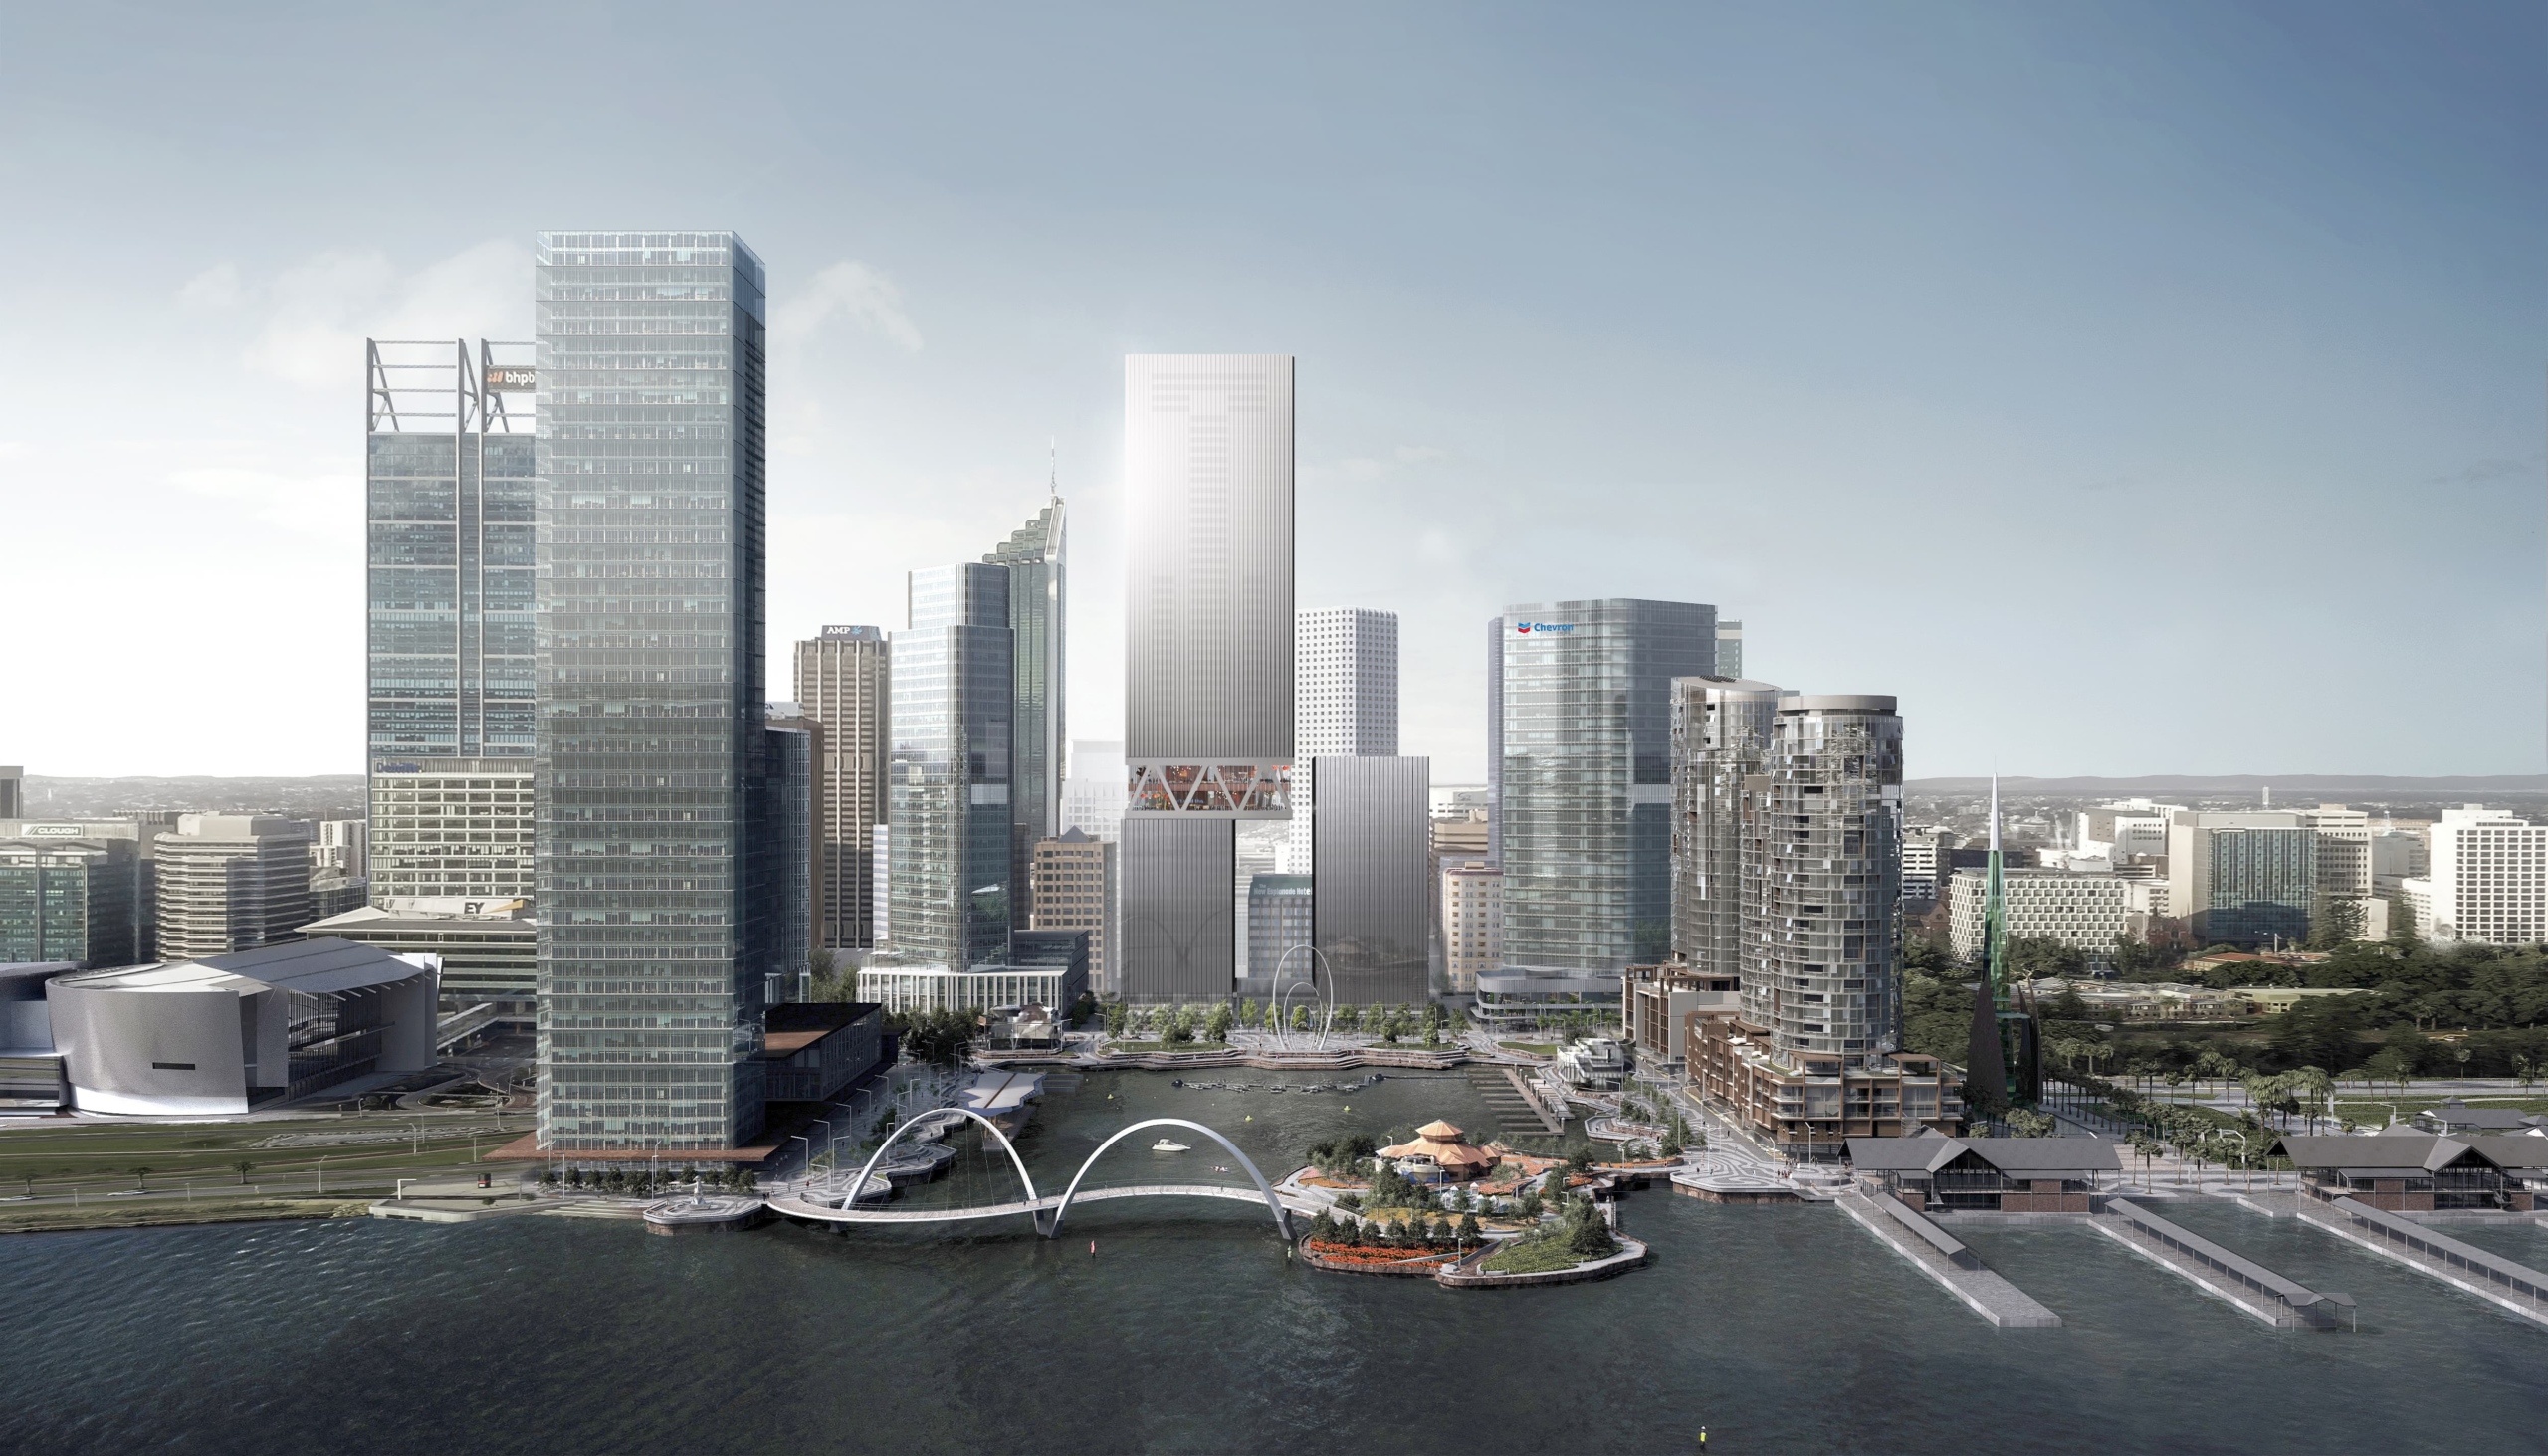 A visualiation of Elizabeth Quay 5 & 6 two-tower mixed-use development project in Perth, Australia.